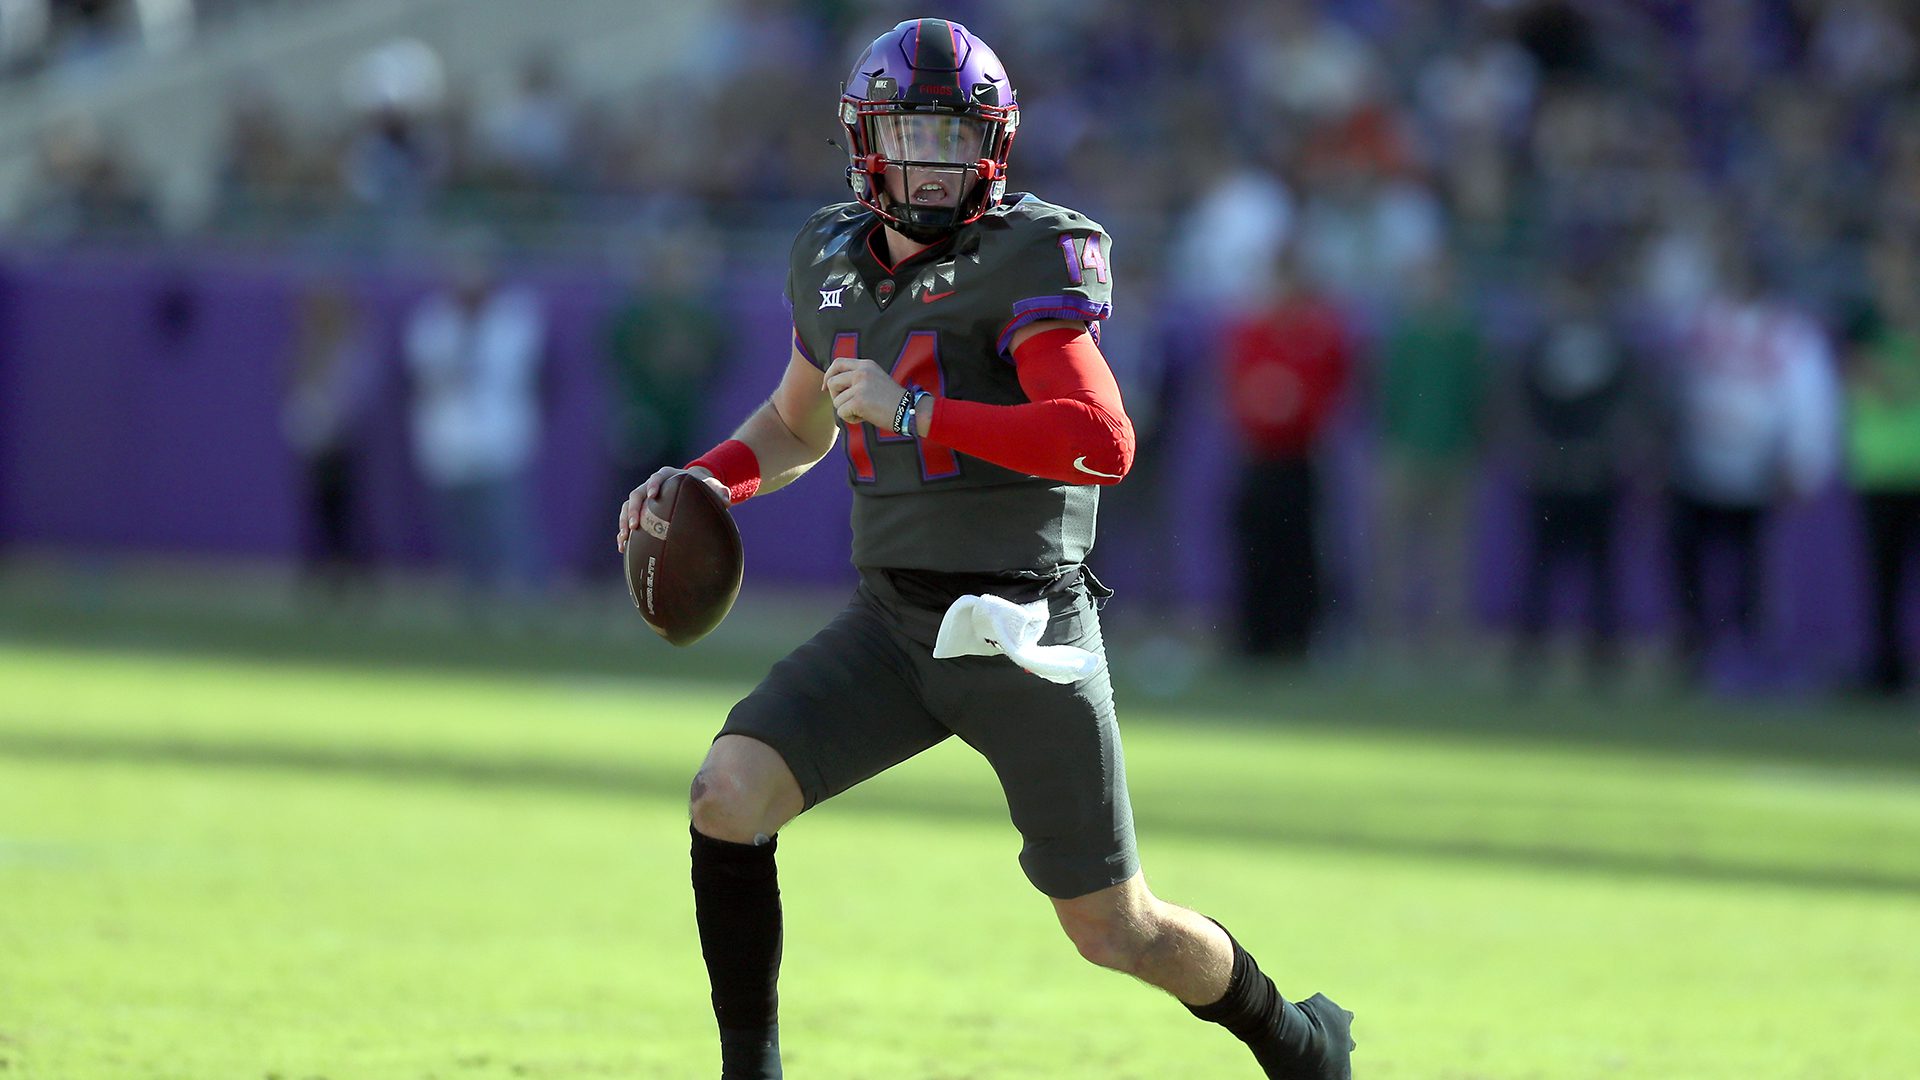 In this video, we break down TCU's QB Chandler Morris' first start for the Horned Frogs.